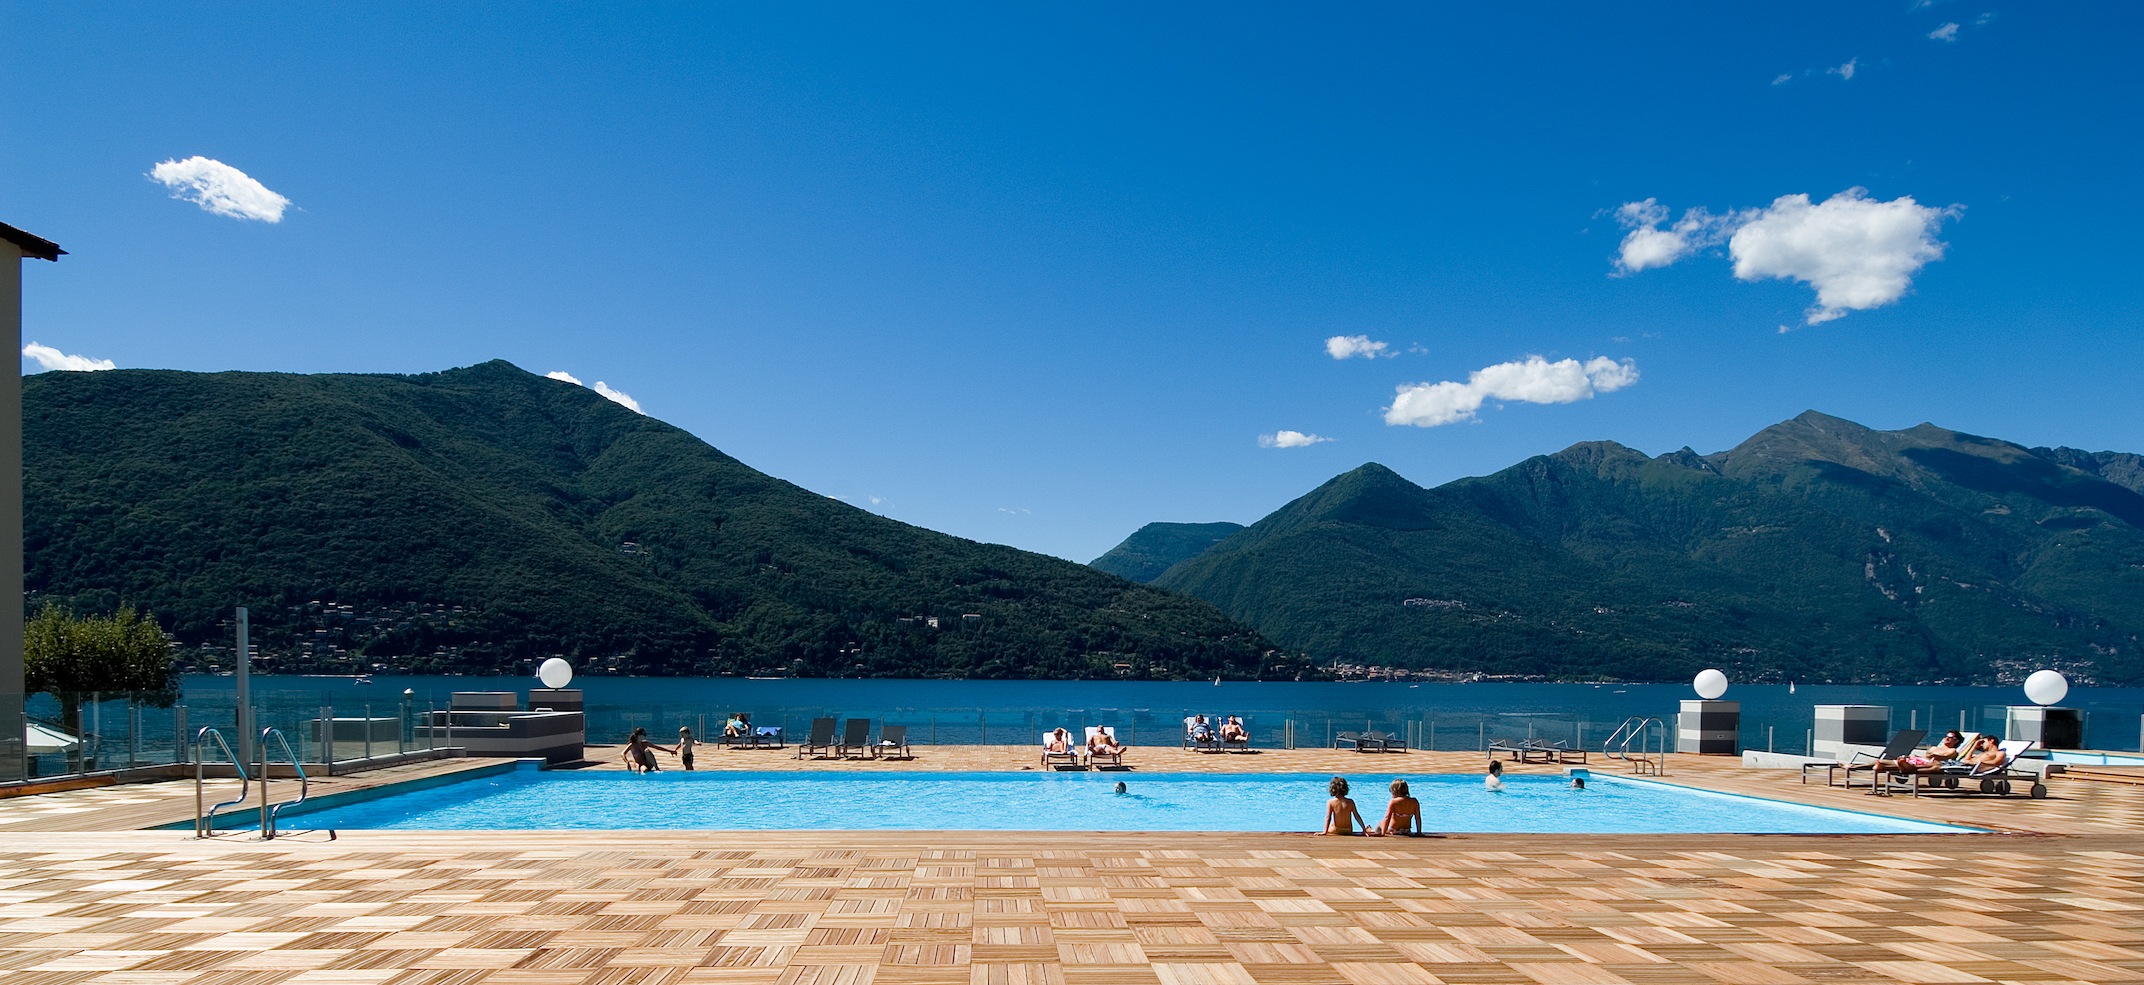 https://www.in-lombardia.it/sites/default/files/accomodation/gallery/105448/32284/swimming_pool_area.jpg